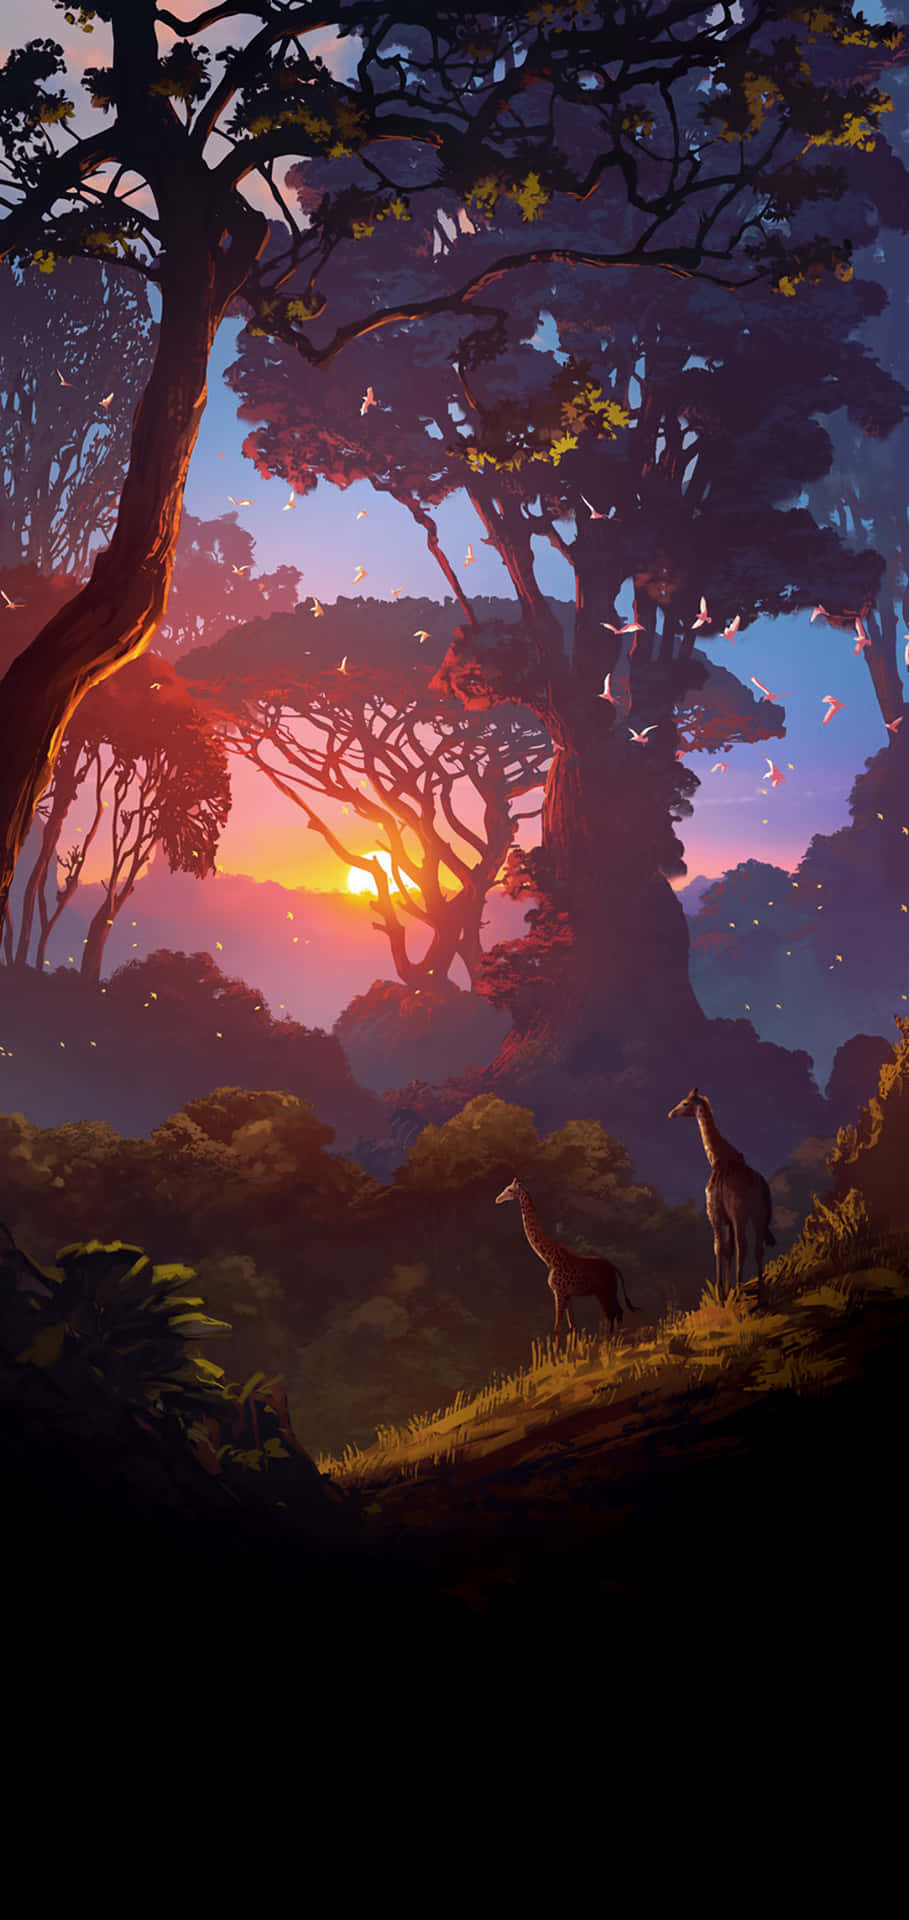 A beautiful African savannah with Android silhouettes lit up in the sky.